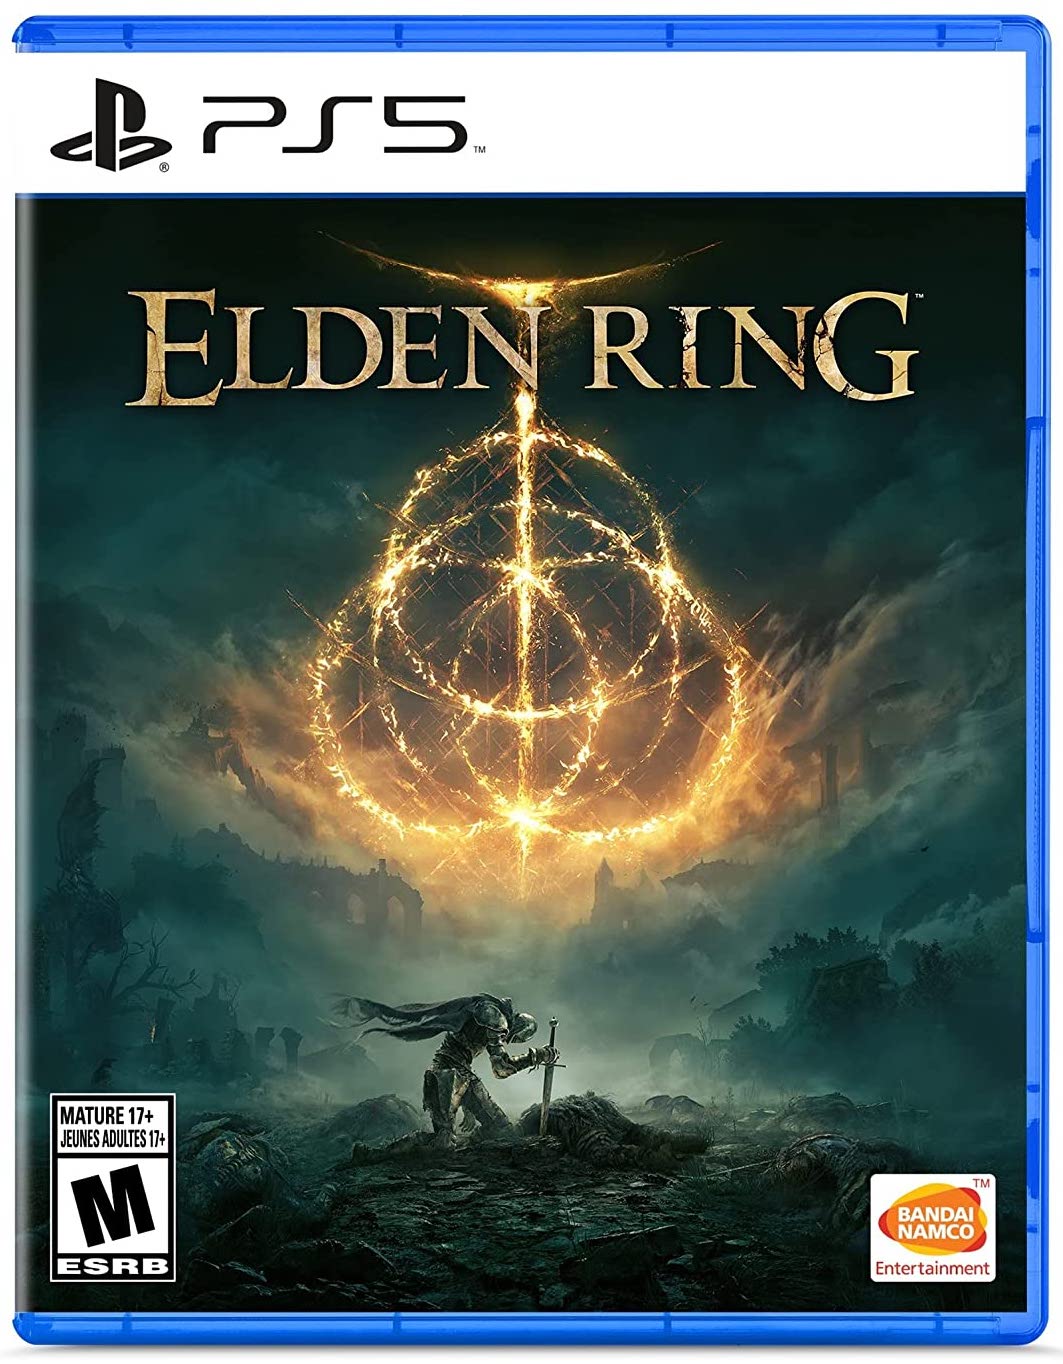 image for "Elden Ring" on PS5